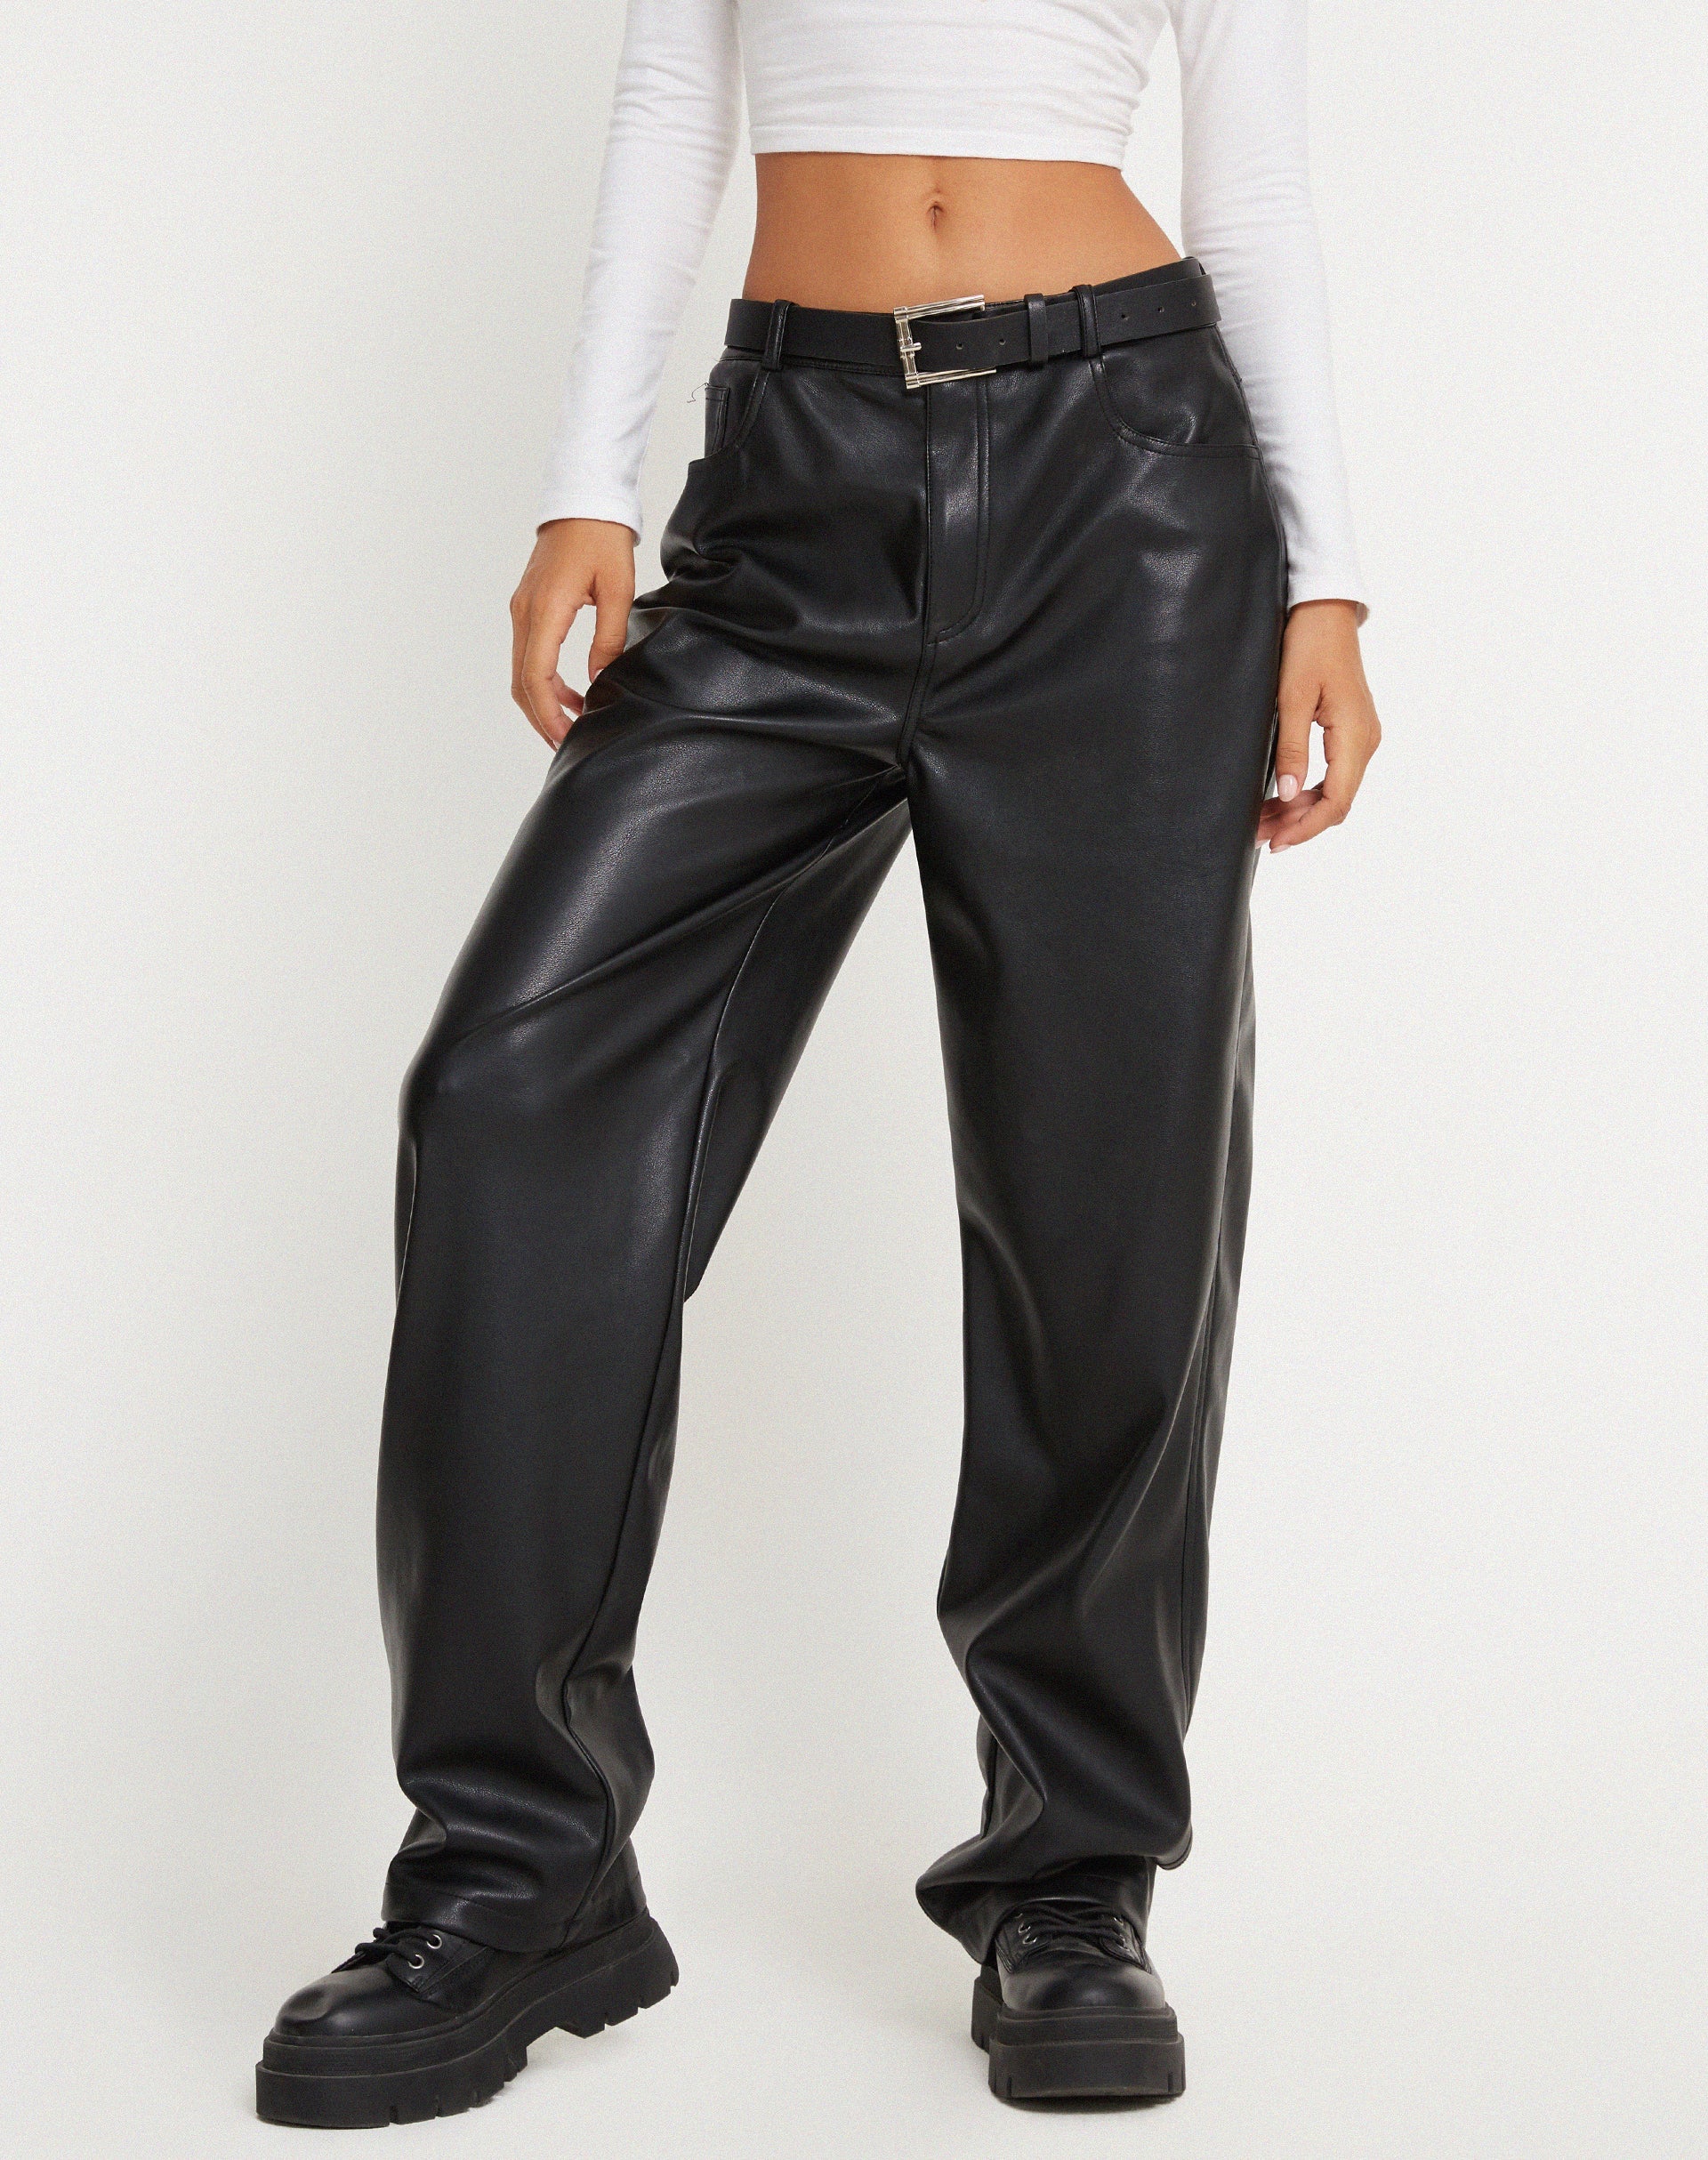 Buy NUSH Black Womens 2 Pocket Parallel Trousers | Shoppers Stop